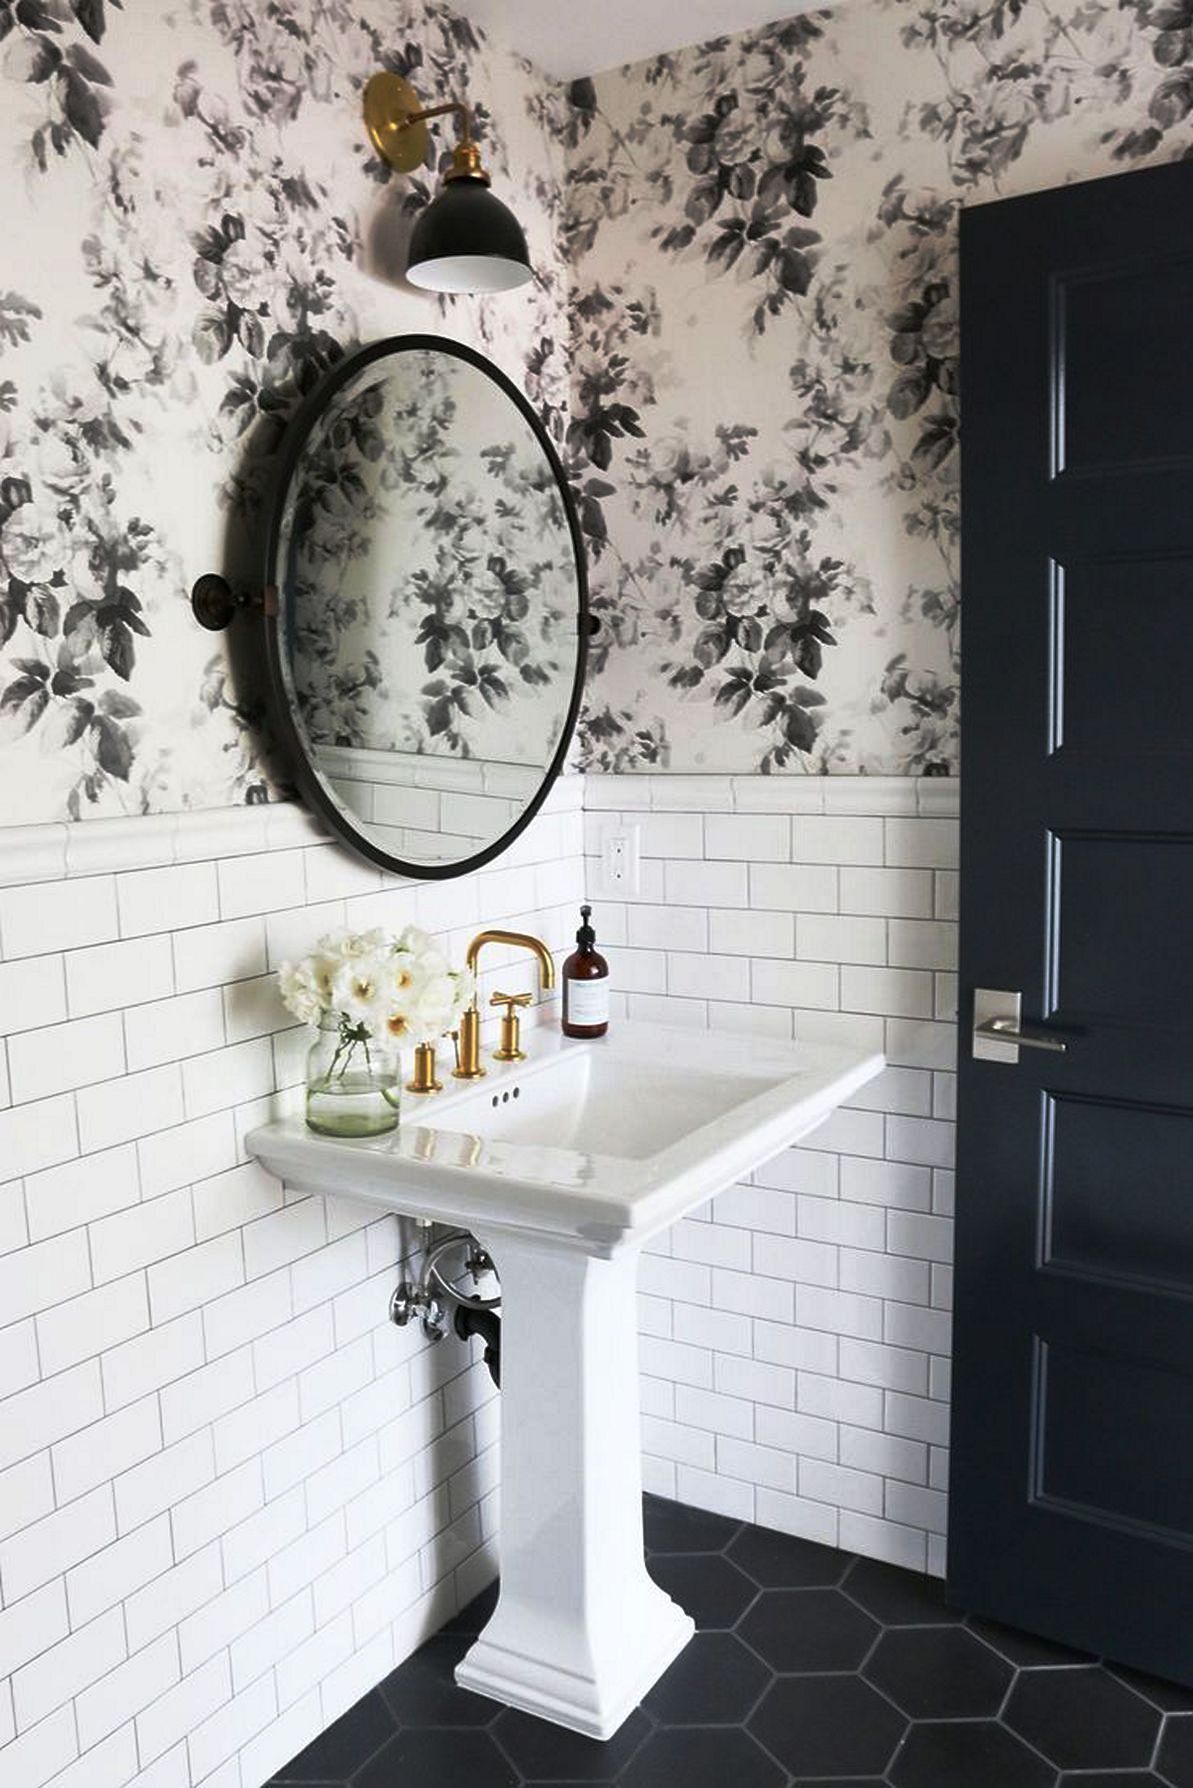 Bathroom trends 2021 the perfect new look for your bathroom remodeling 25